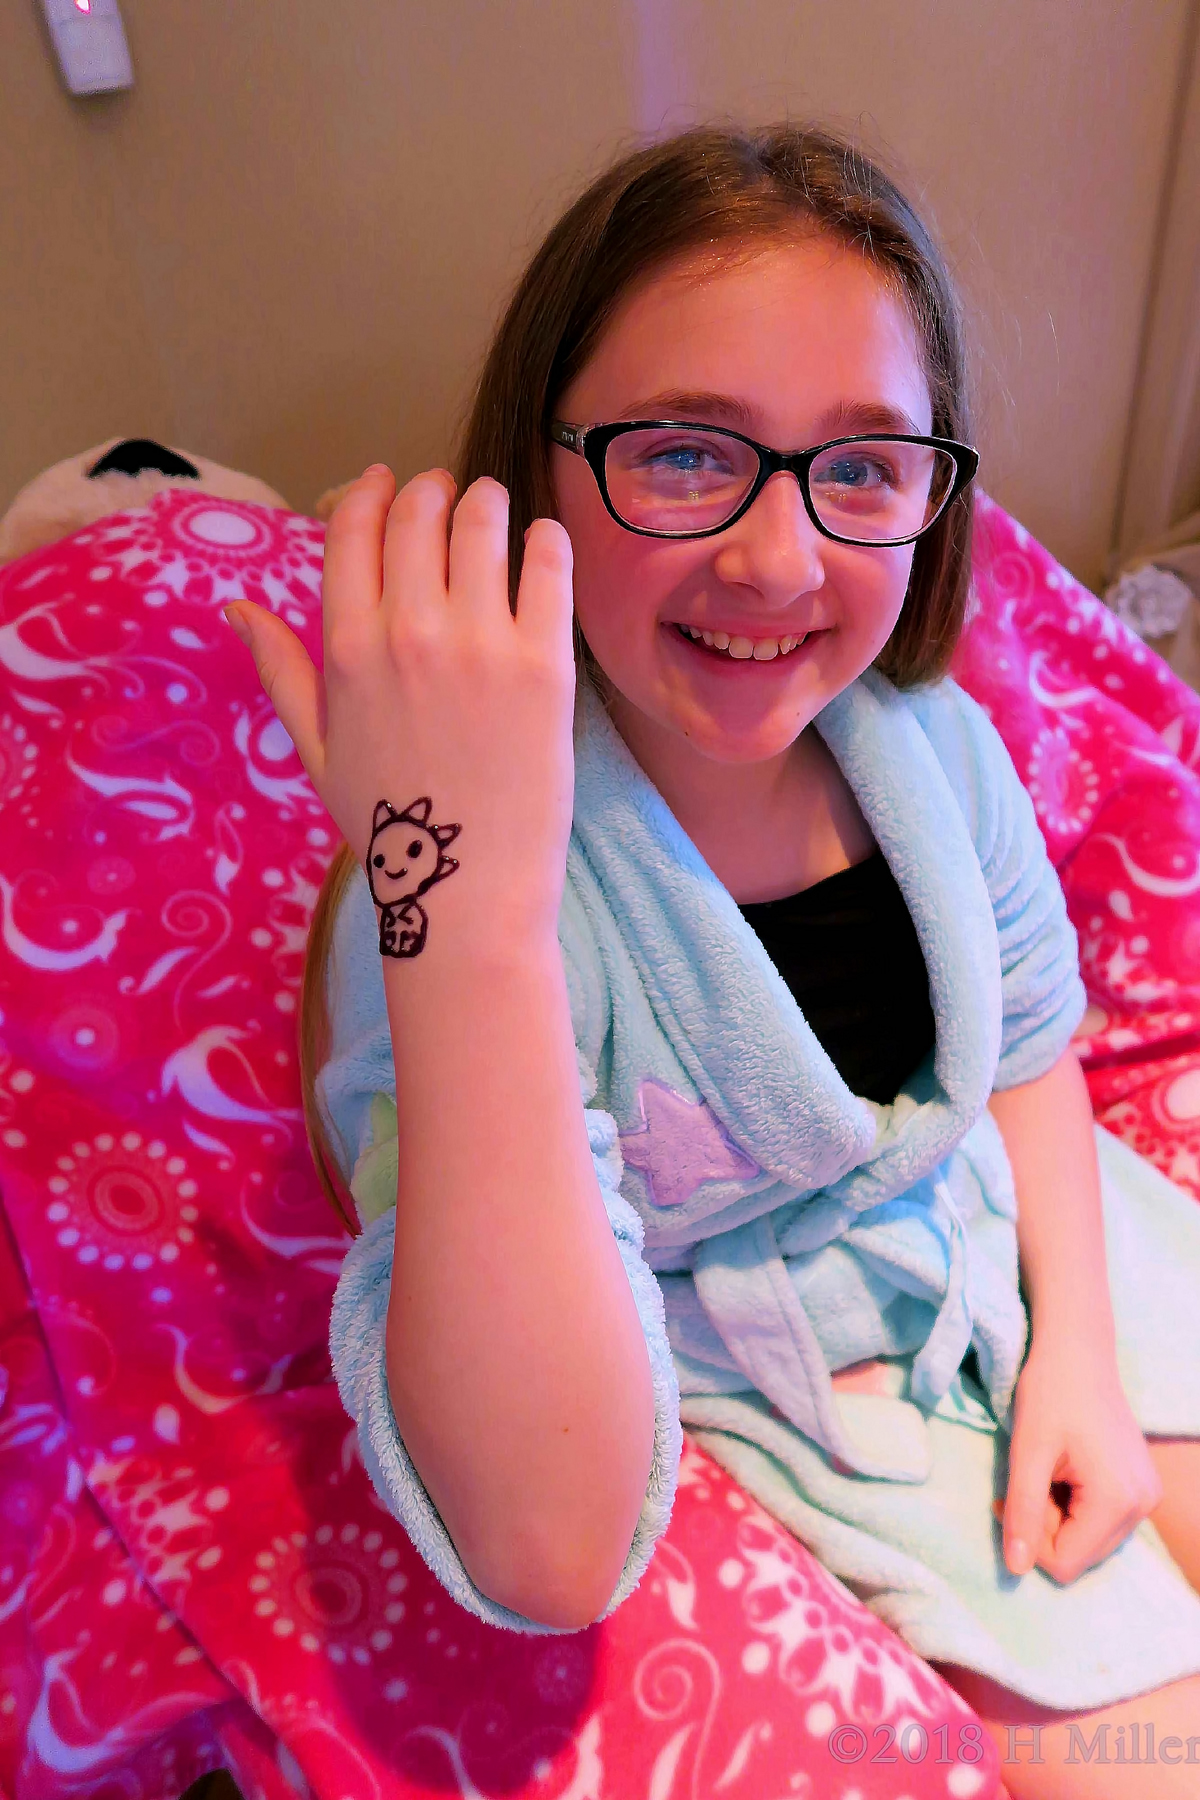 She Happily Shows Her Cute Jagua Temporary Tattoo. 